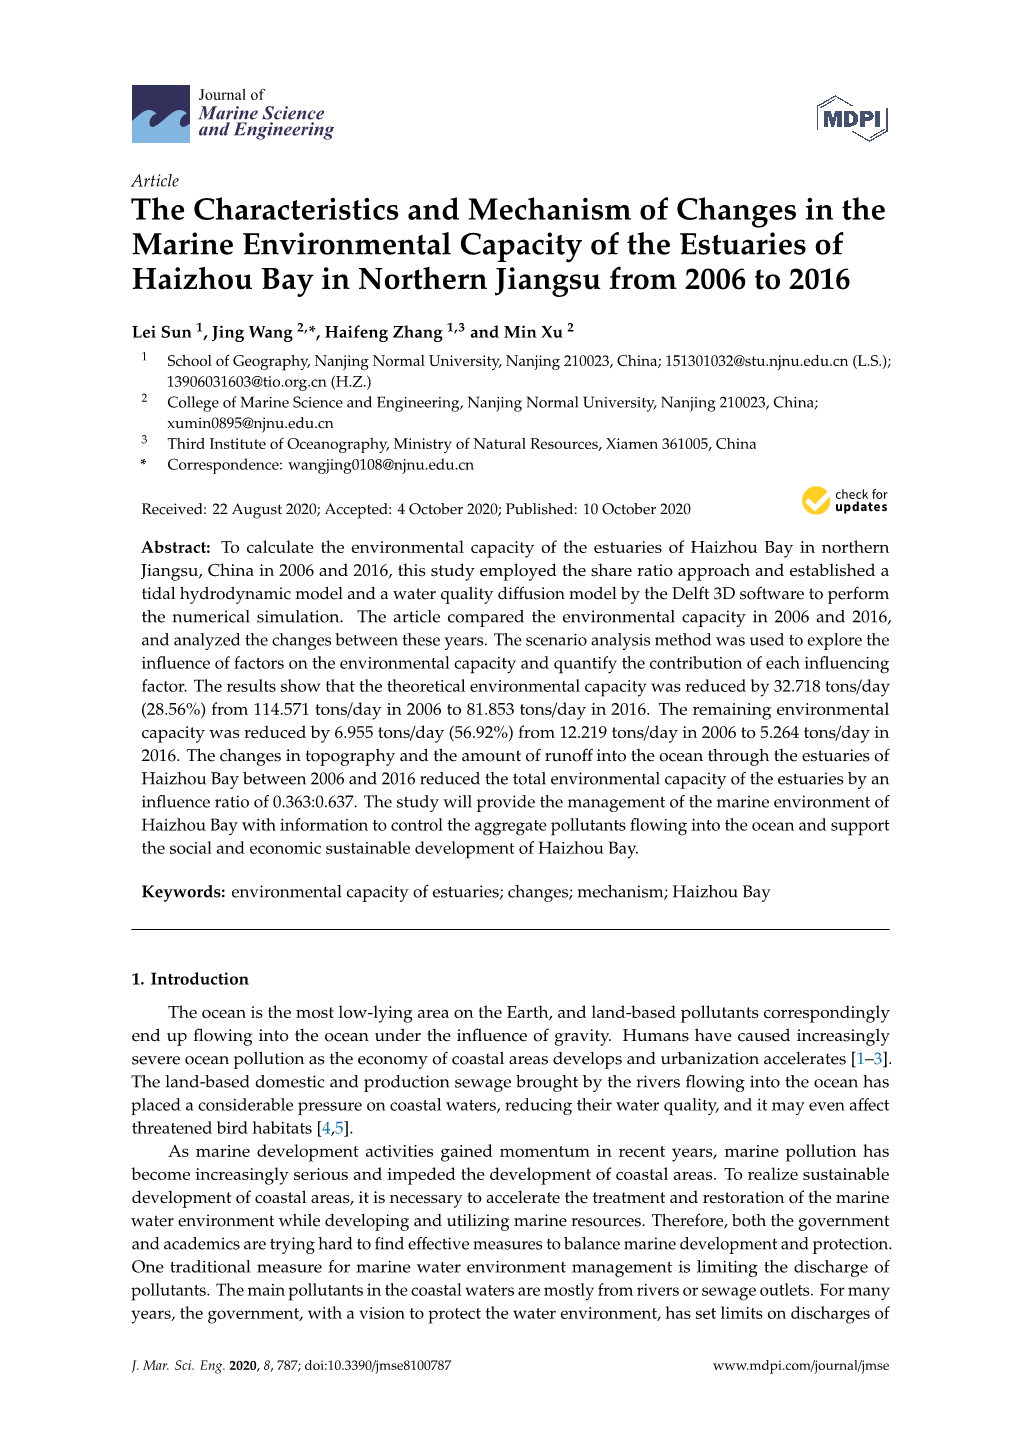 The Characteristics and Mechanism of Changes in the Marine Environmental Capacity of the Estuaries of Haizhou Bay in Northern Jiangsu from 2006 to 2016